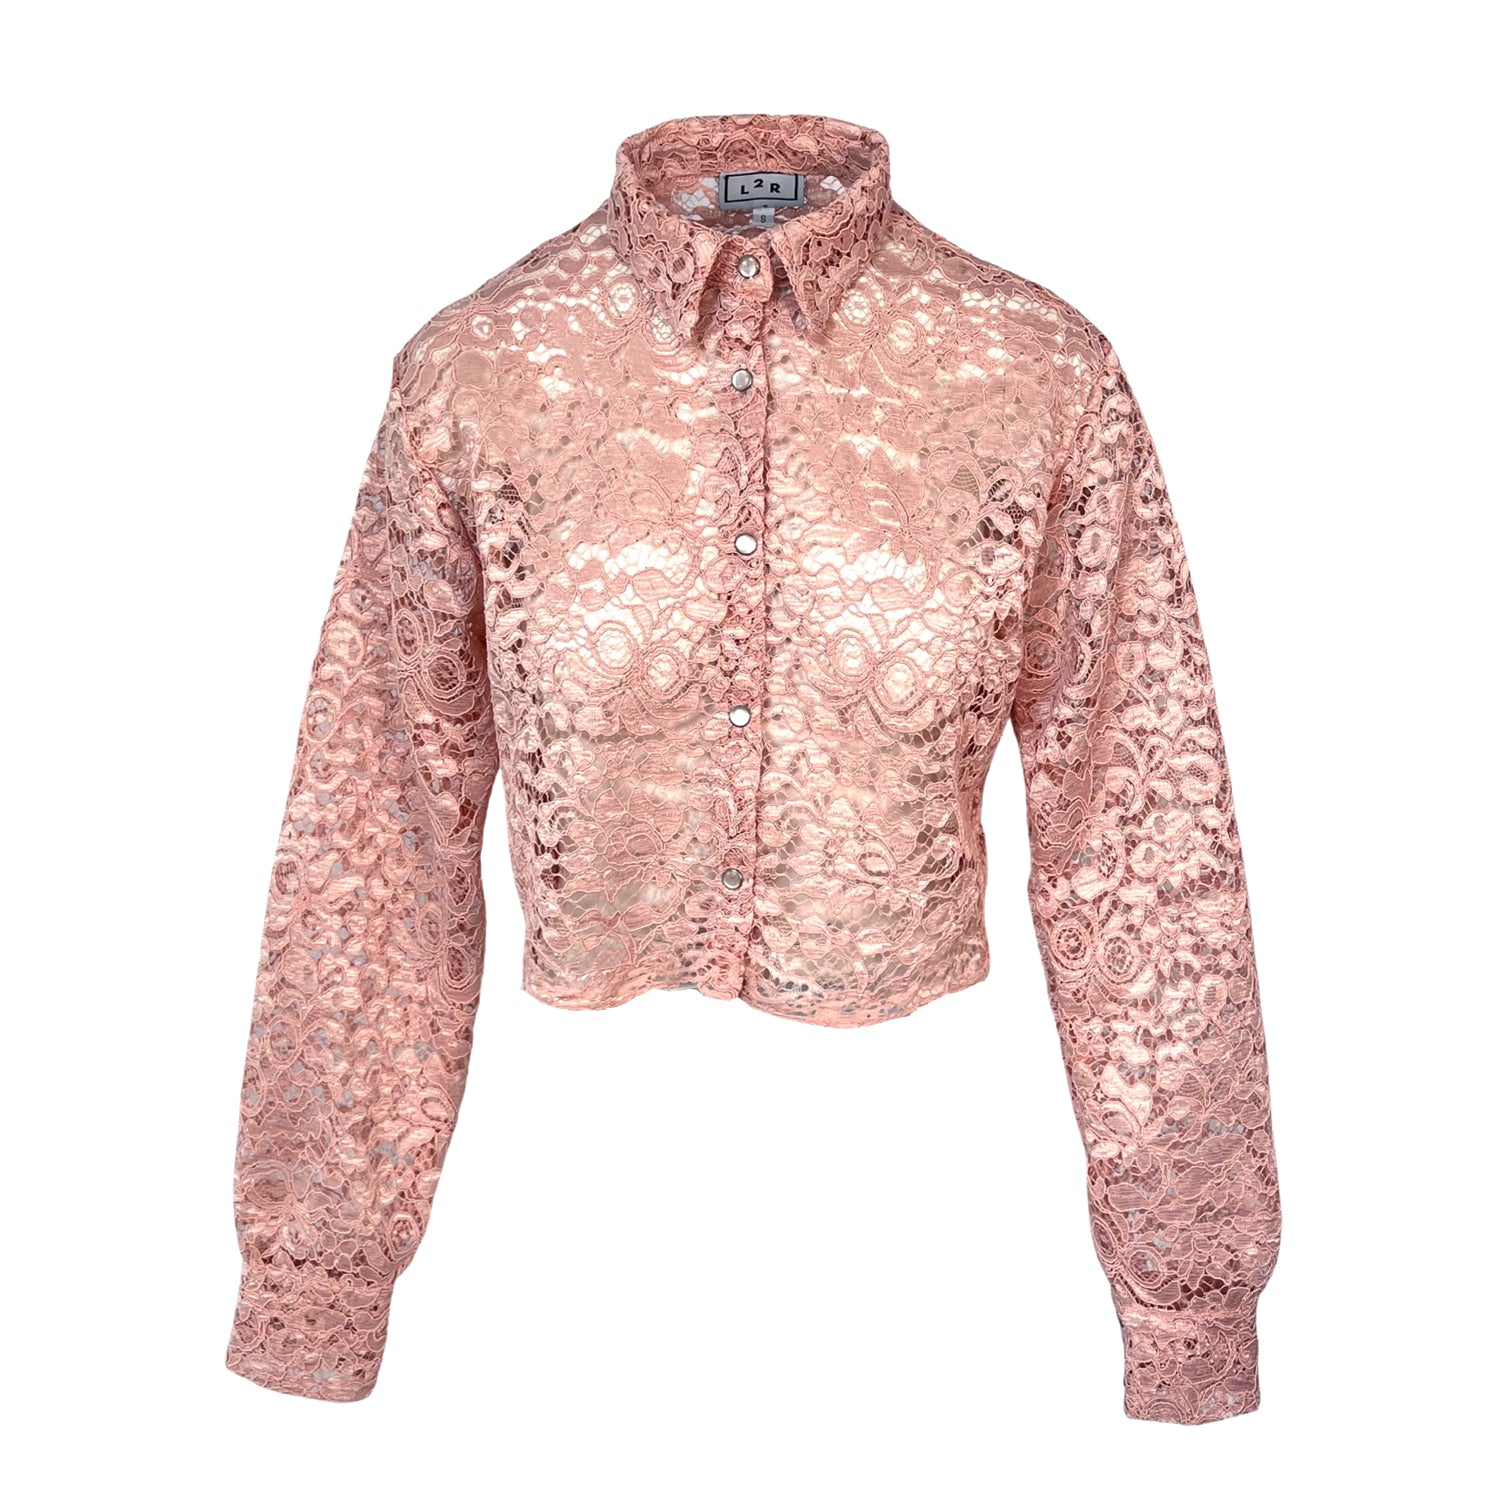 L2r The Label Women's Pink / Purple Cropped Shirt - Pink Lace In Multi